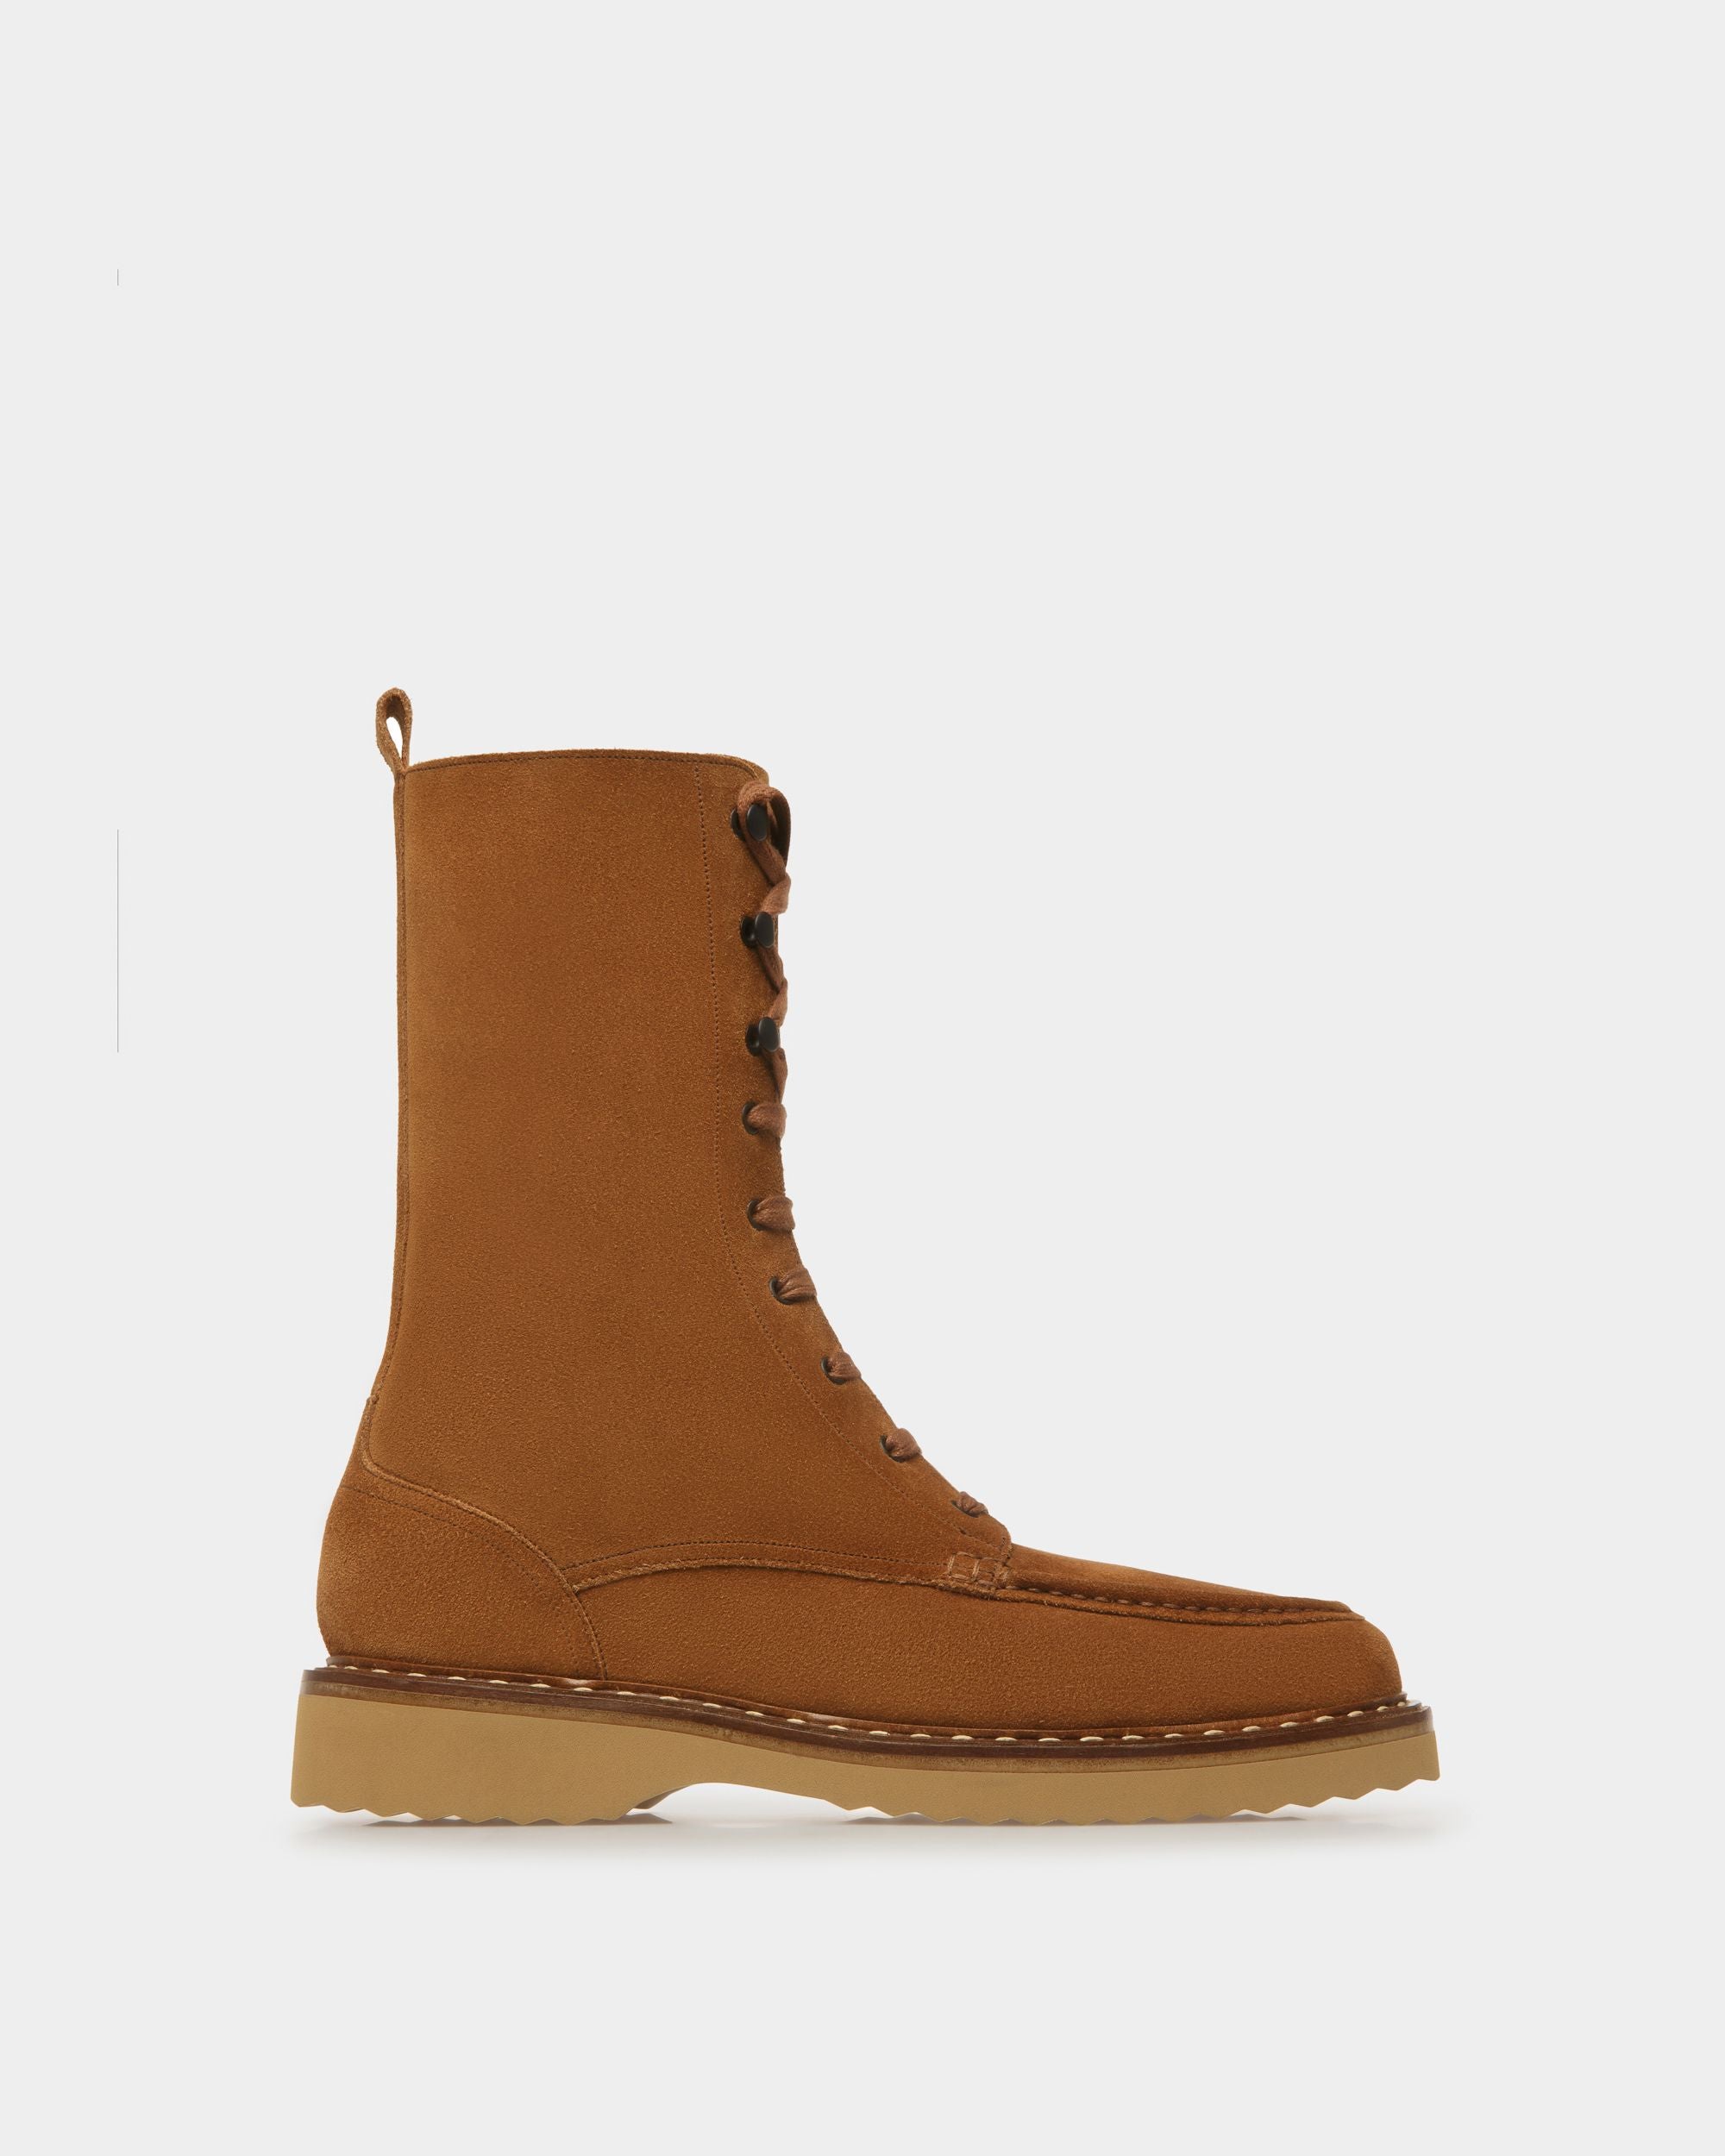 Novarno | Men's Boots | Brown Leather | Bally | Still Life Side